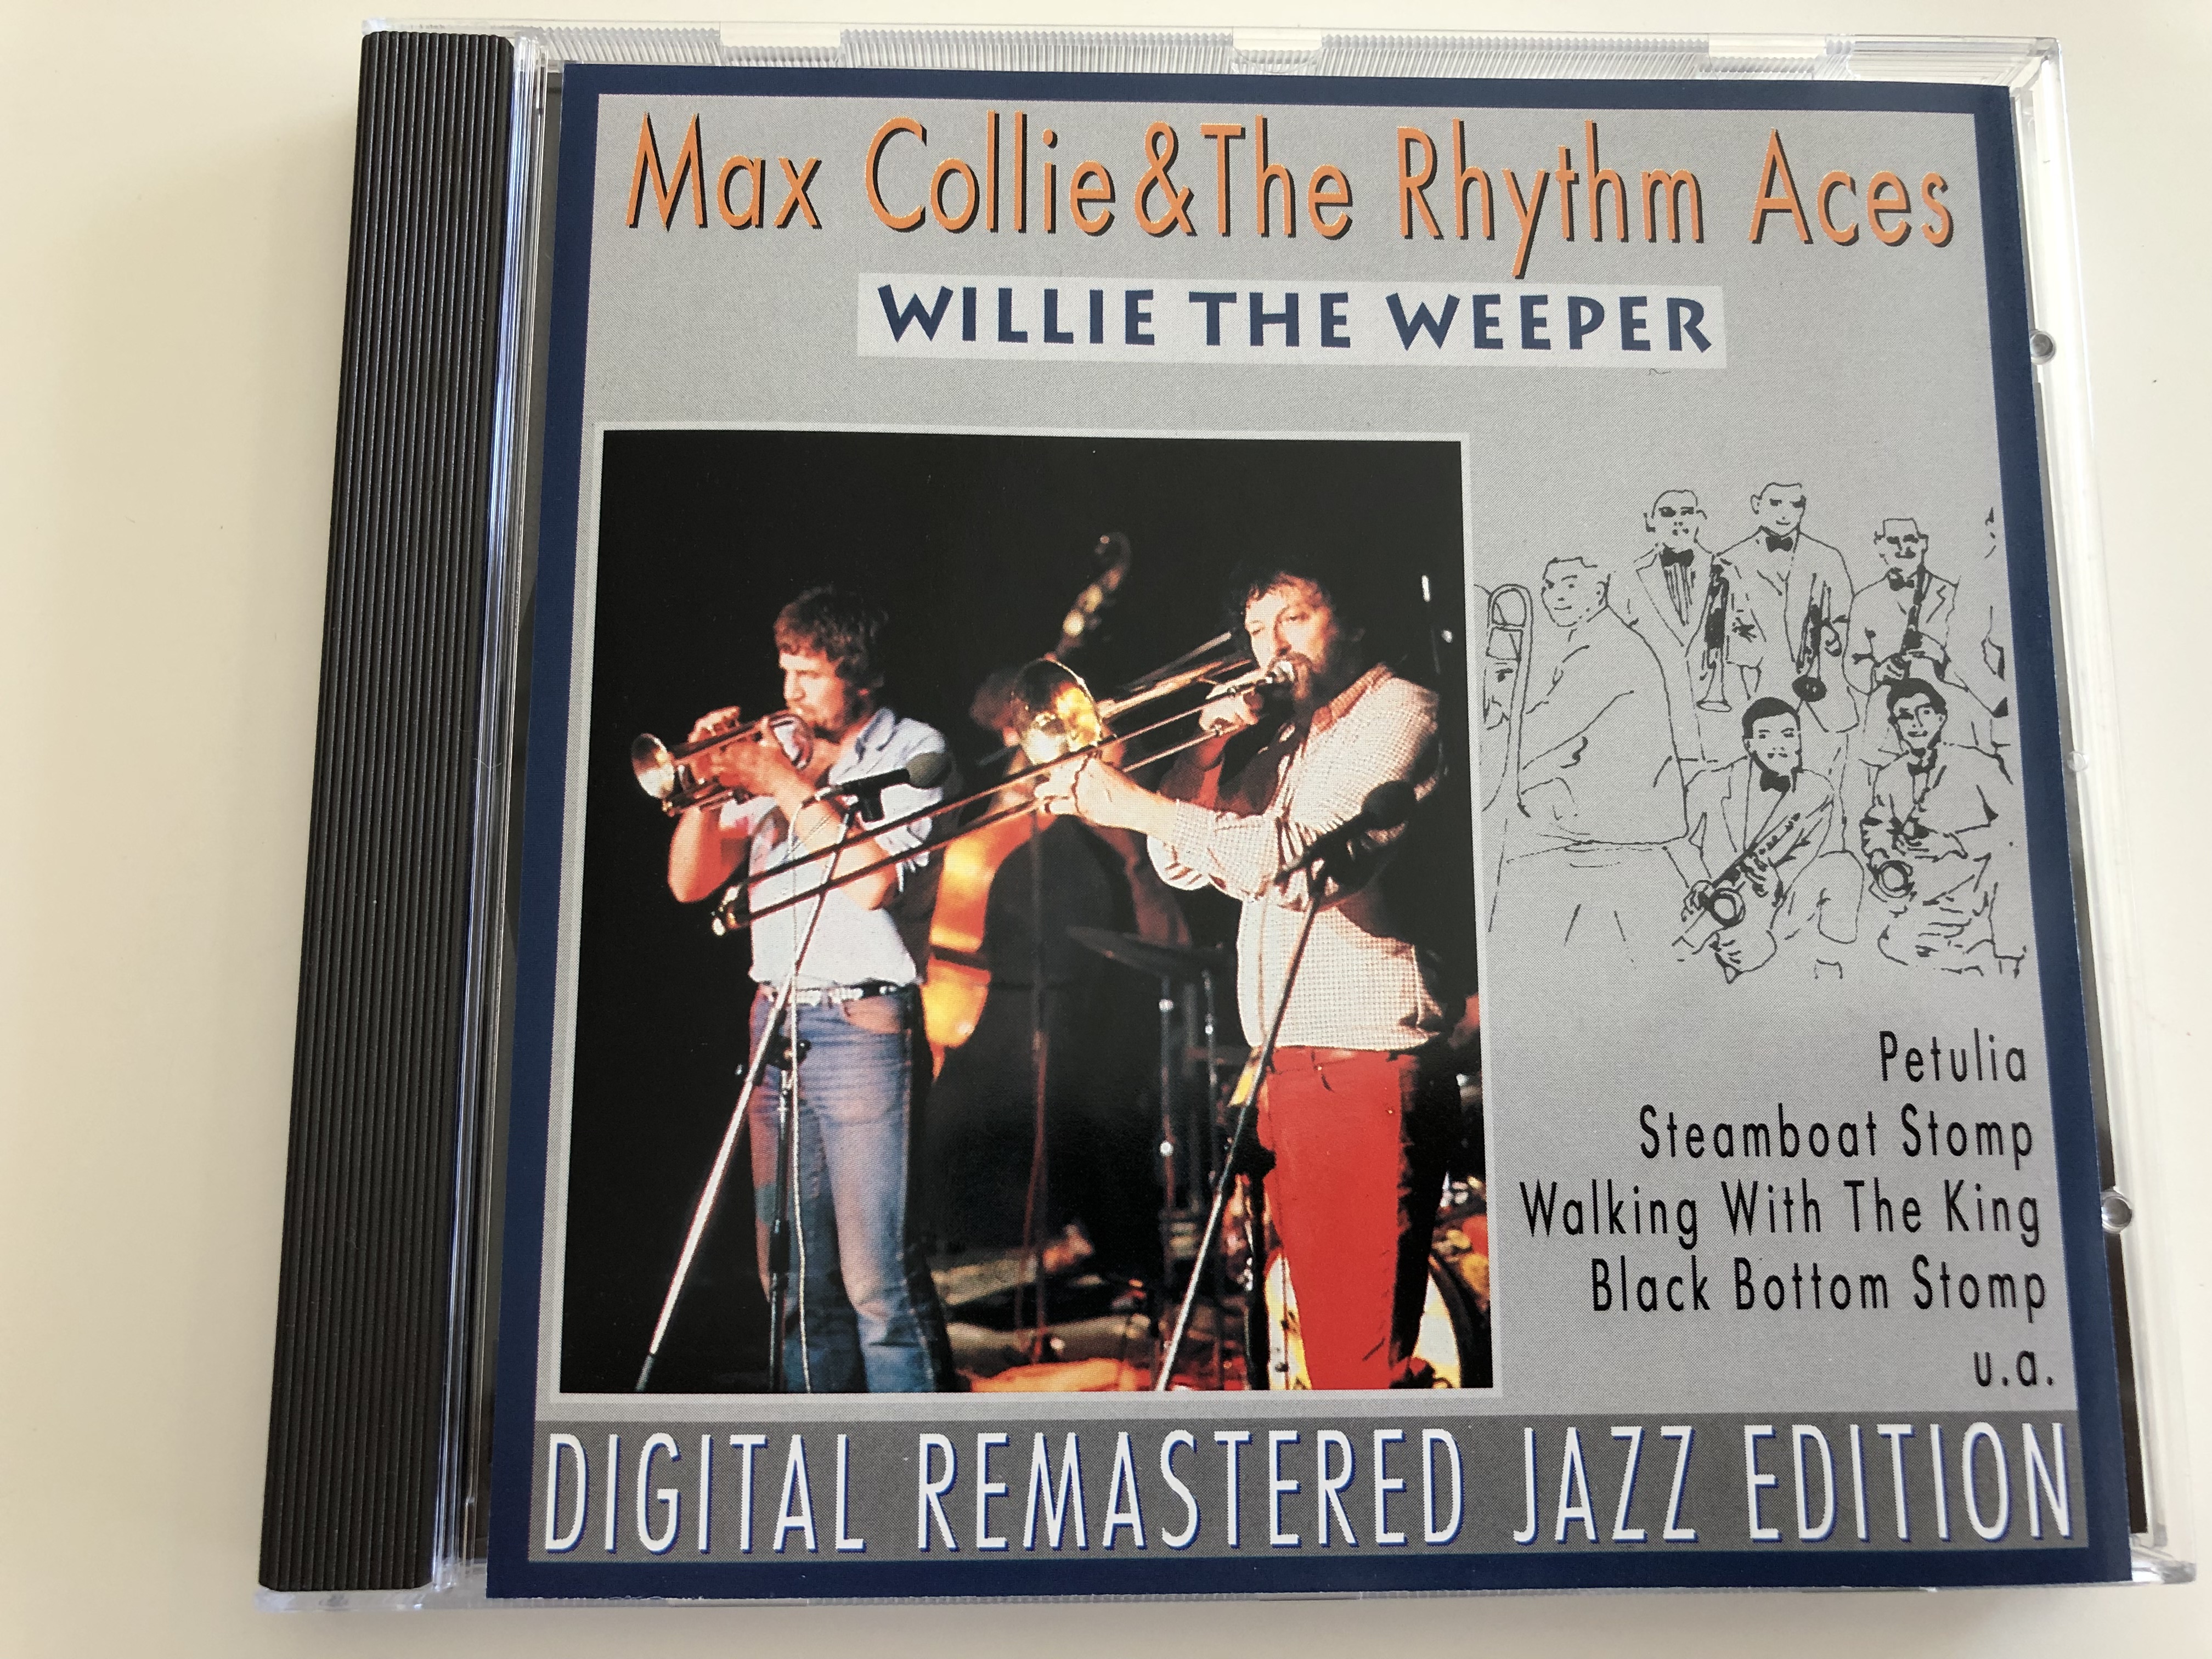 -max-collie-the-rhythm-aces-willie-the-weeper-petulia-steamboat-stomp-walking-with-the-king-black-bottom-stomp-audio-cd-1995-digitally-remastered-jazz-edition-1-.jpg